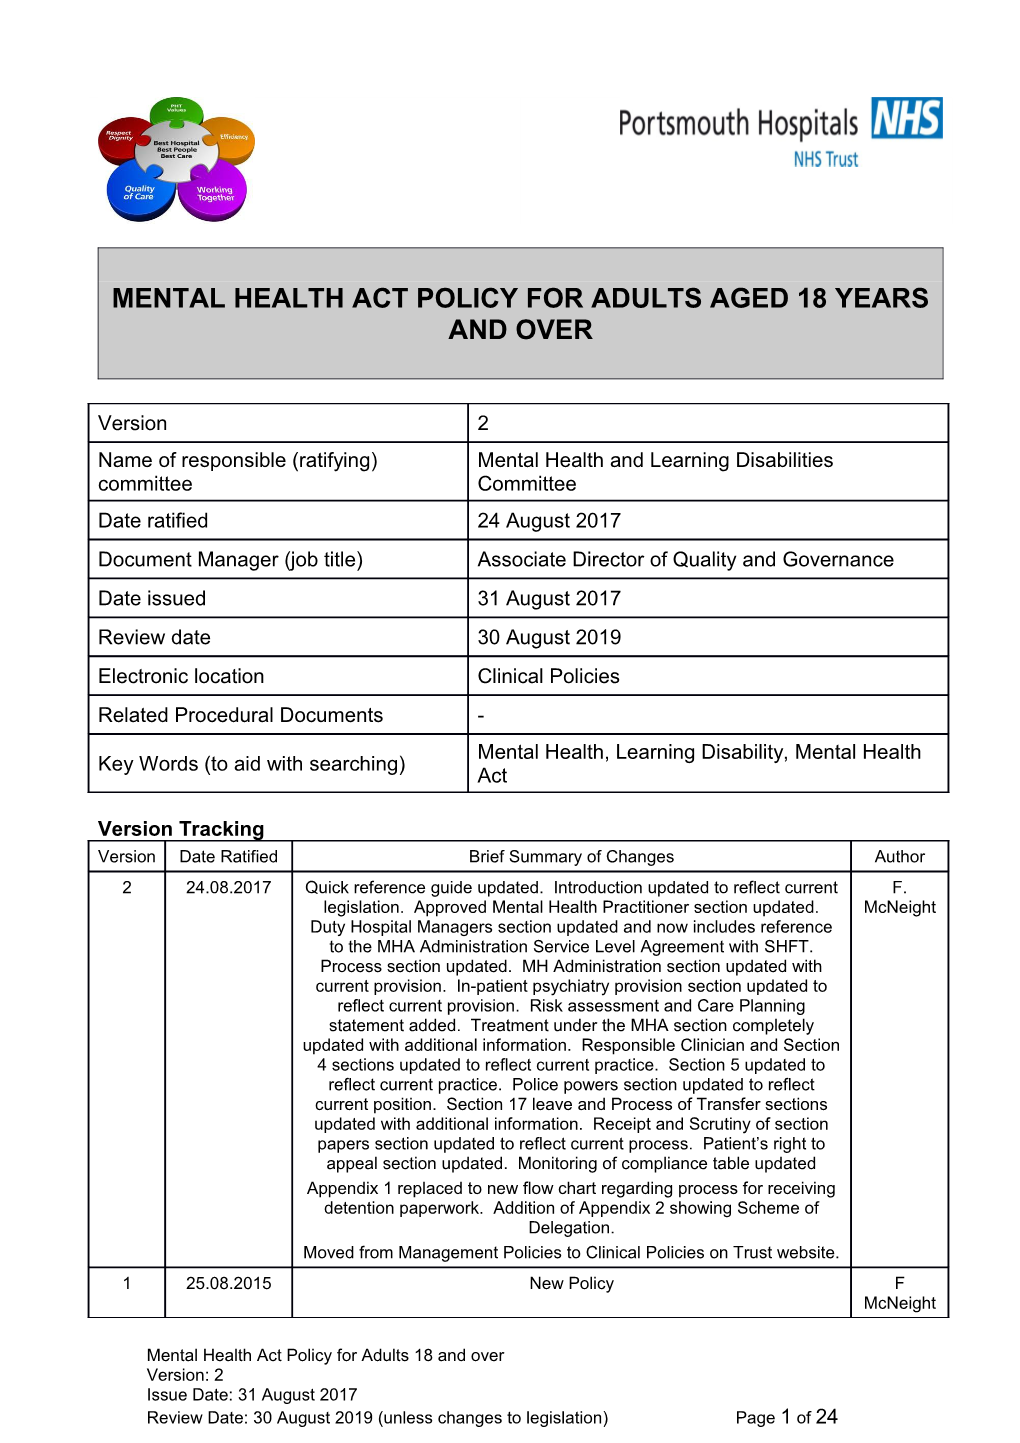 Mental Health Act Policy for Adults Aged 18 Years and Over